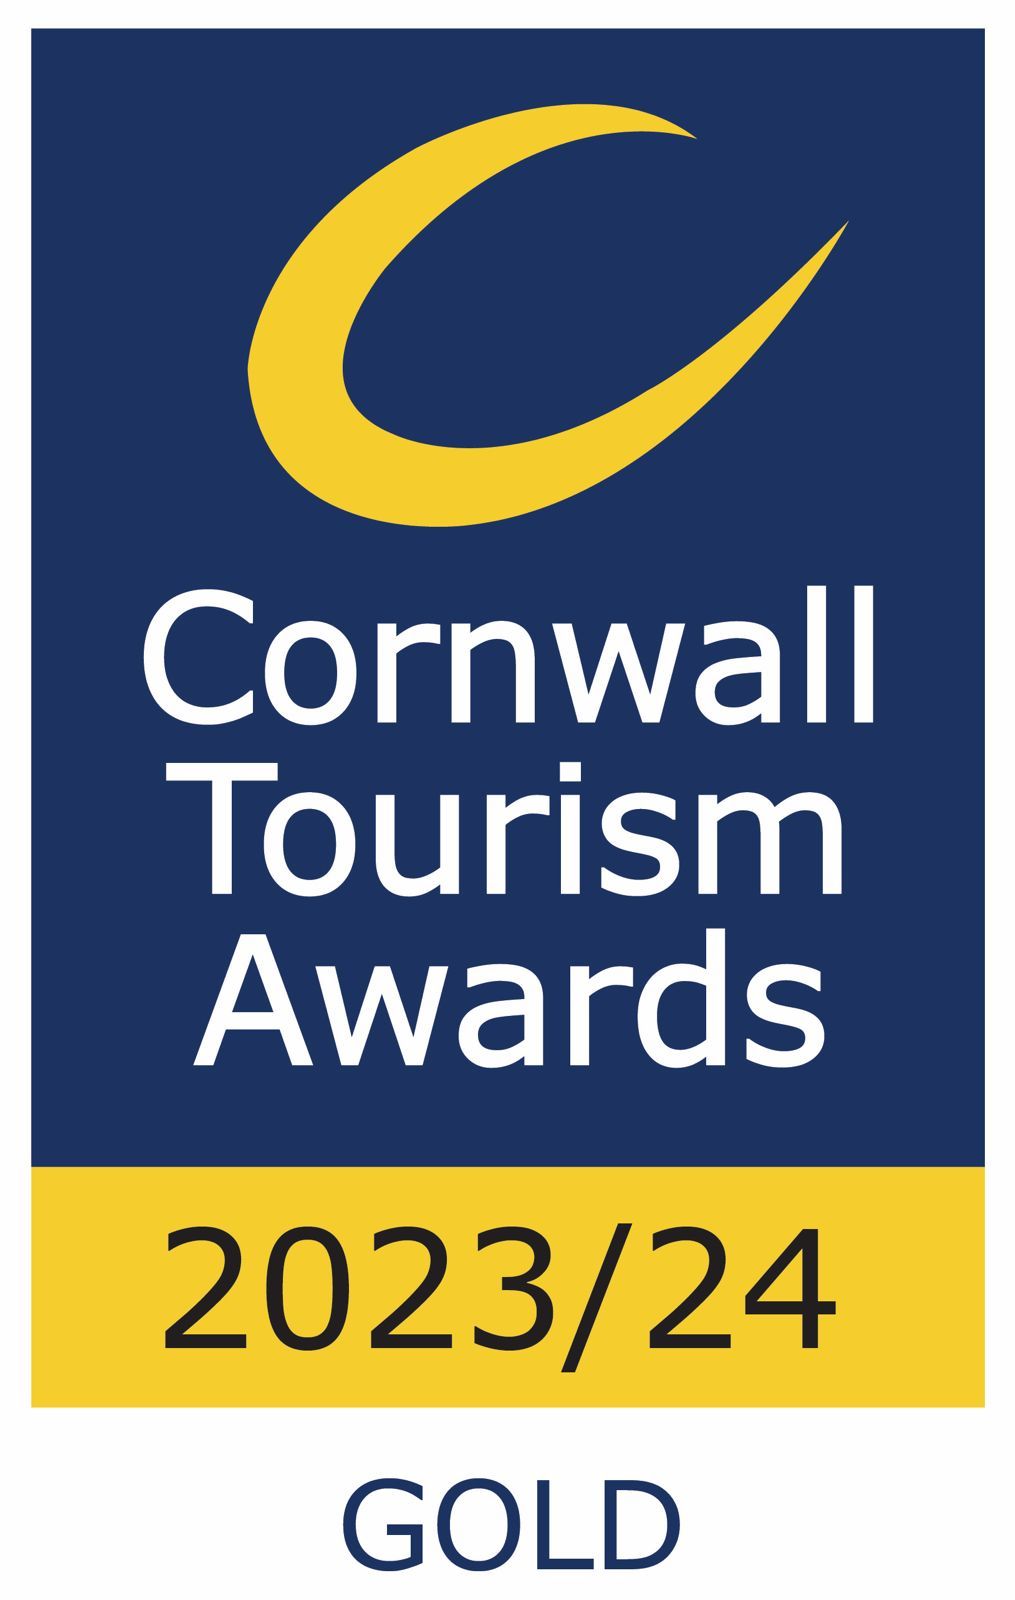 Gold - Cornwall Tourism Awards, Dog-Friendly Business of the Year - 2023/2024 